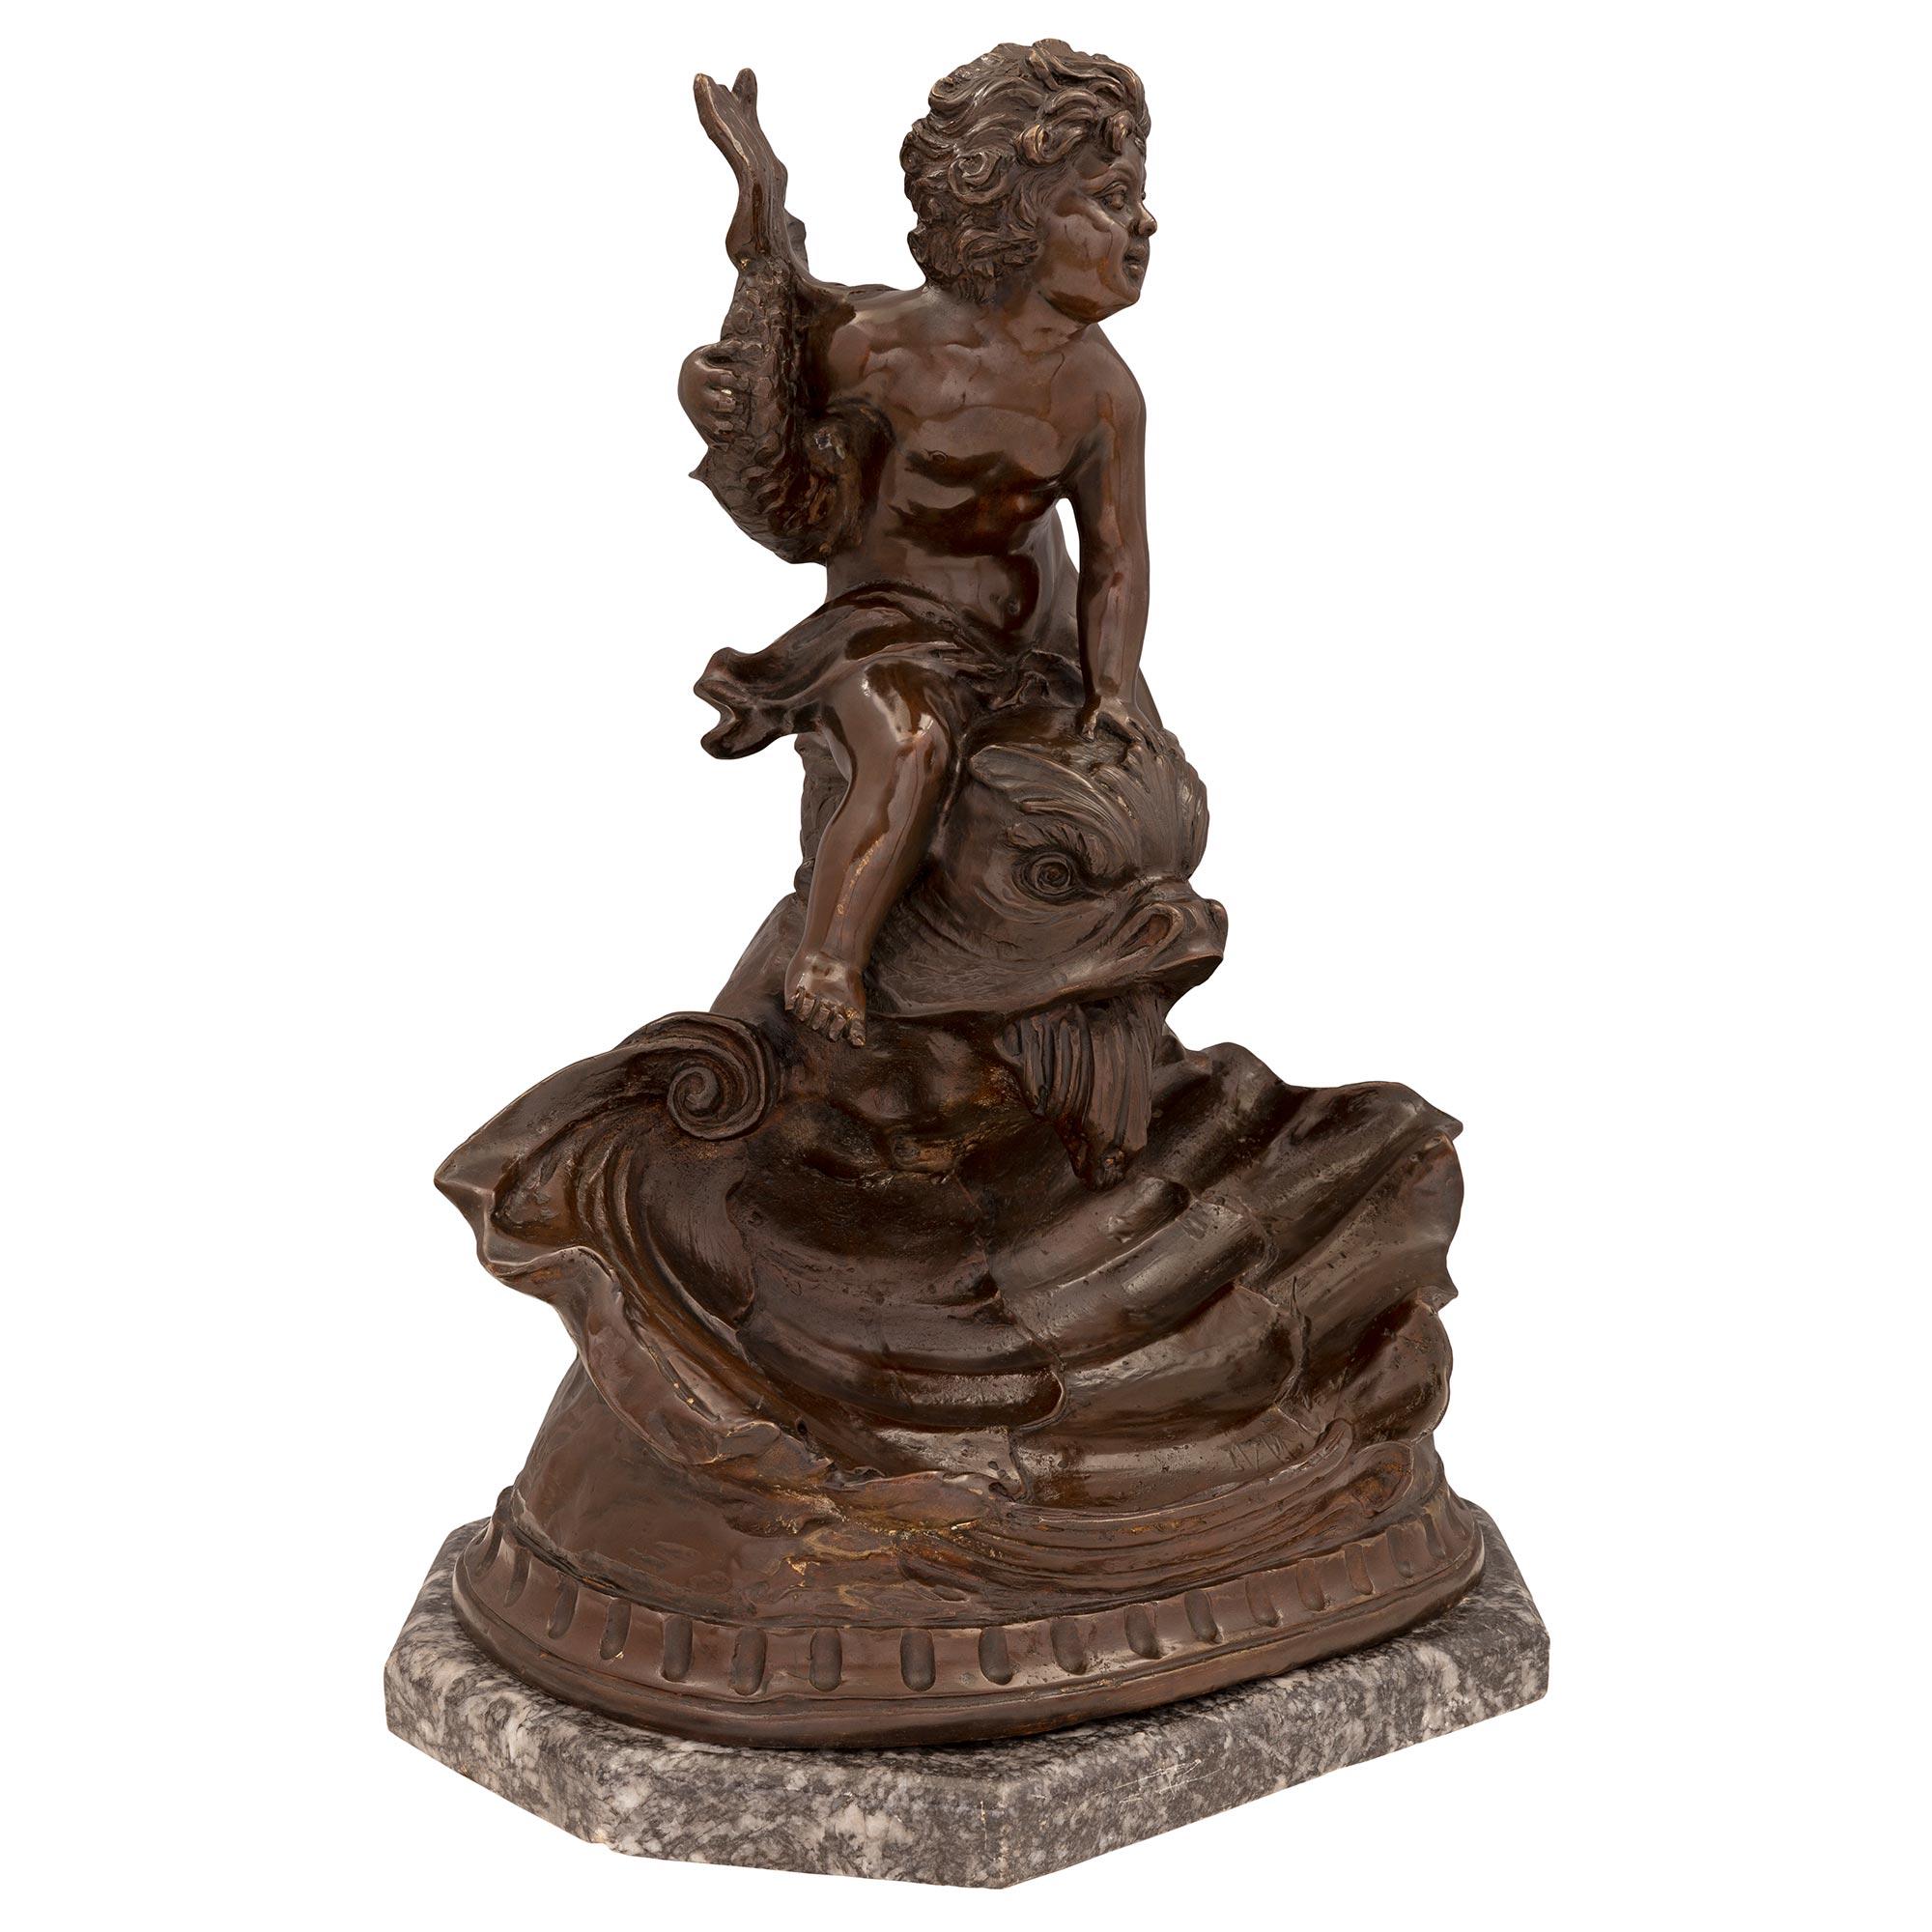 A striking French 19th century Louis XVI st. patinated bronze and Gris St. Anne marble statue signed Kinsburger. The statue is raised by its original elegant octagonal Gris St. Anne marble base below the impressive rock and wave designed bowl in the